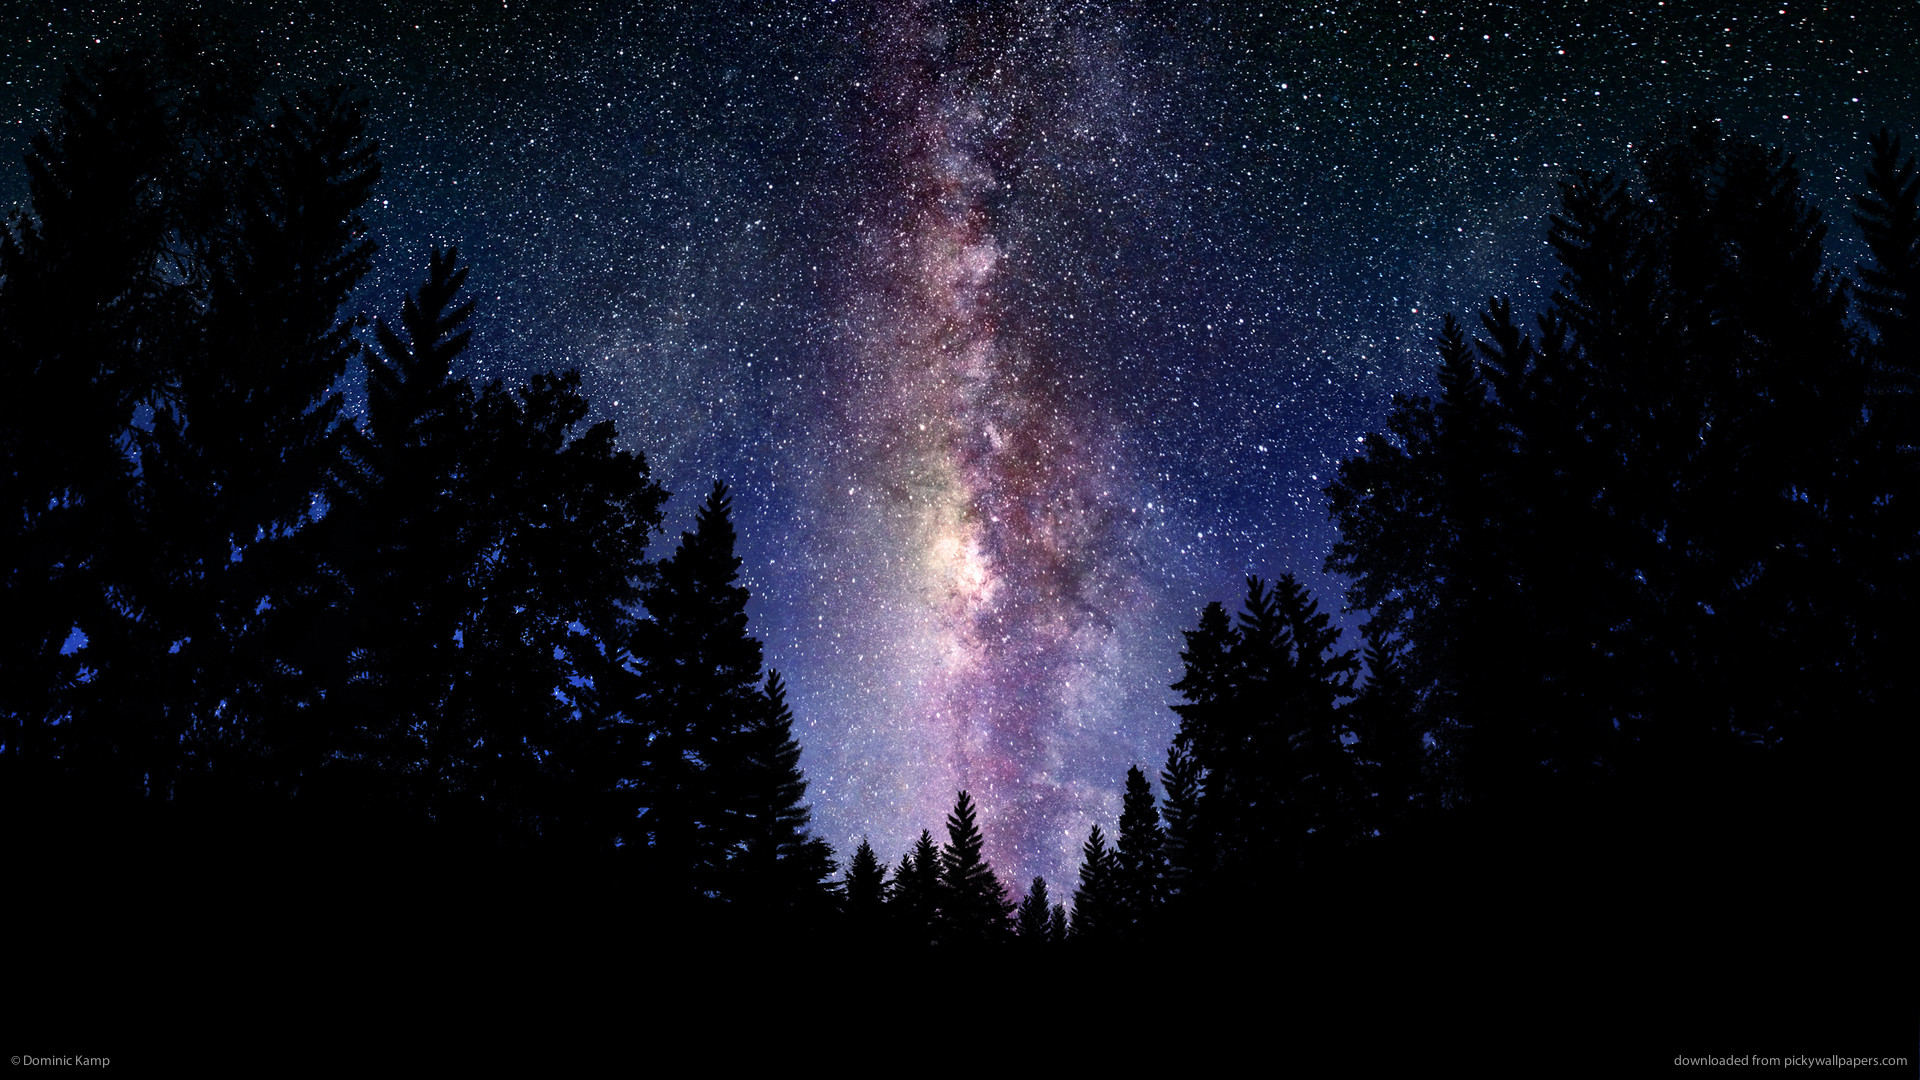 The Milky Way Galaxy picture